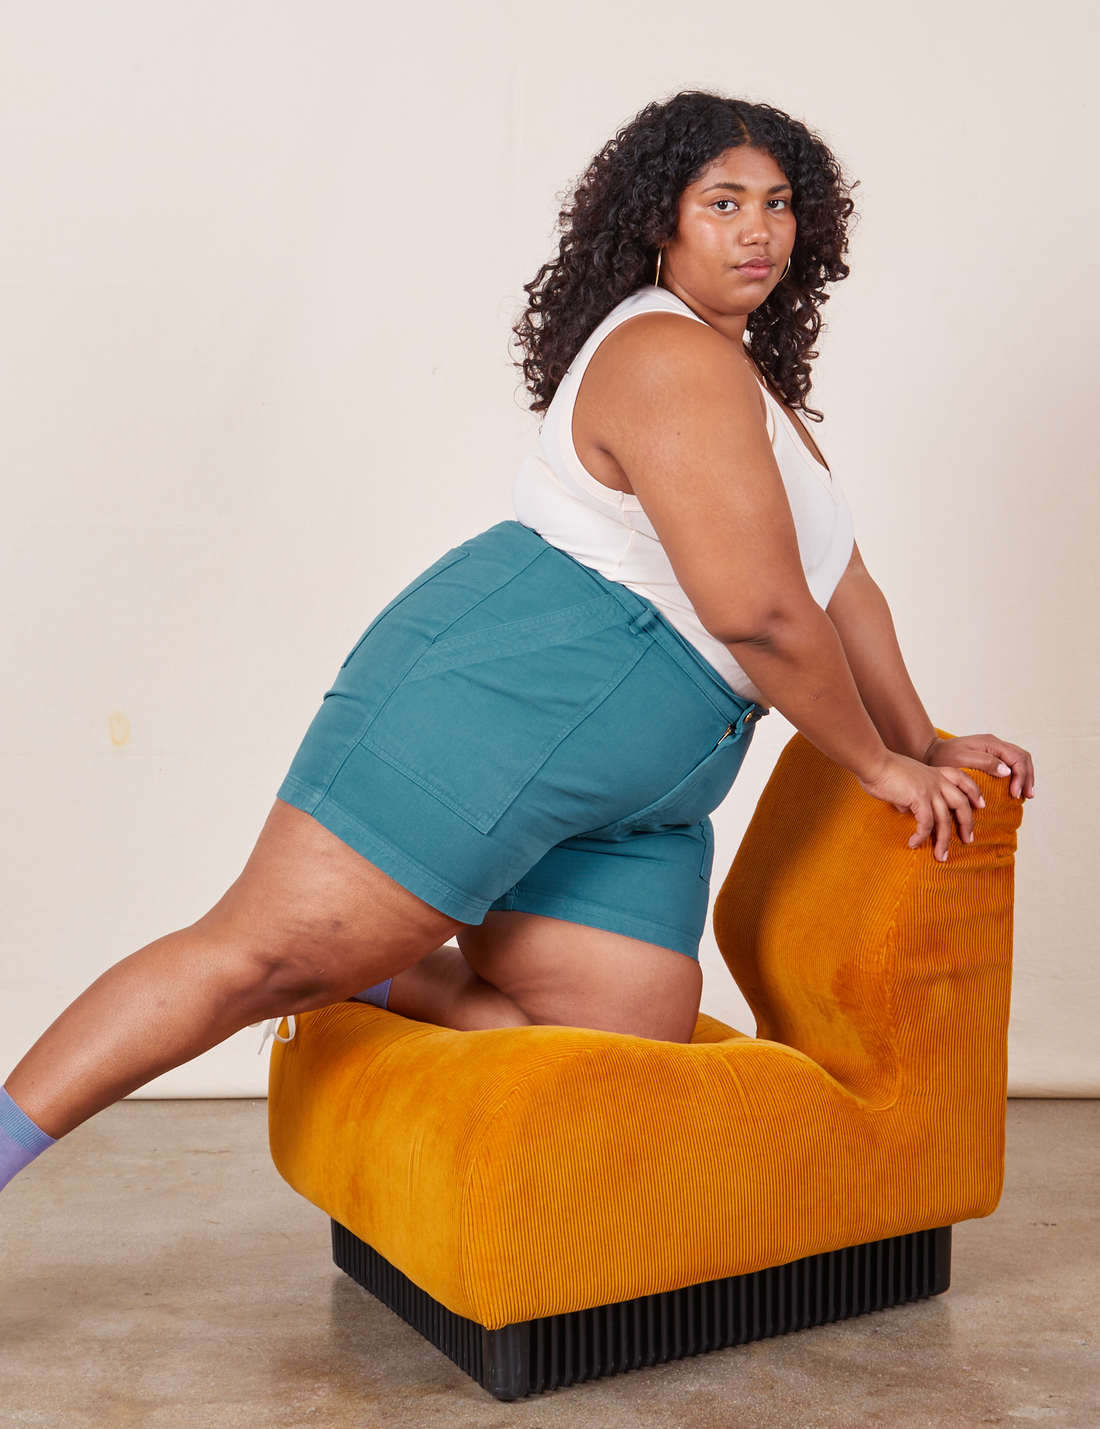 Morgan is kneeling on a upholstered chair wearing Classic Work Shorts in Marine Blue and vintage off-white Tank Top